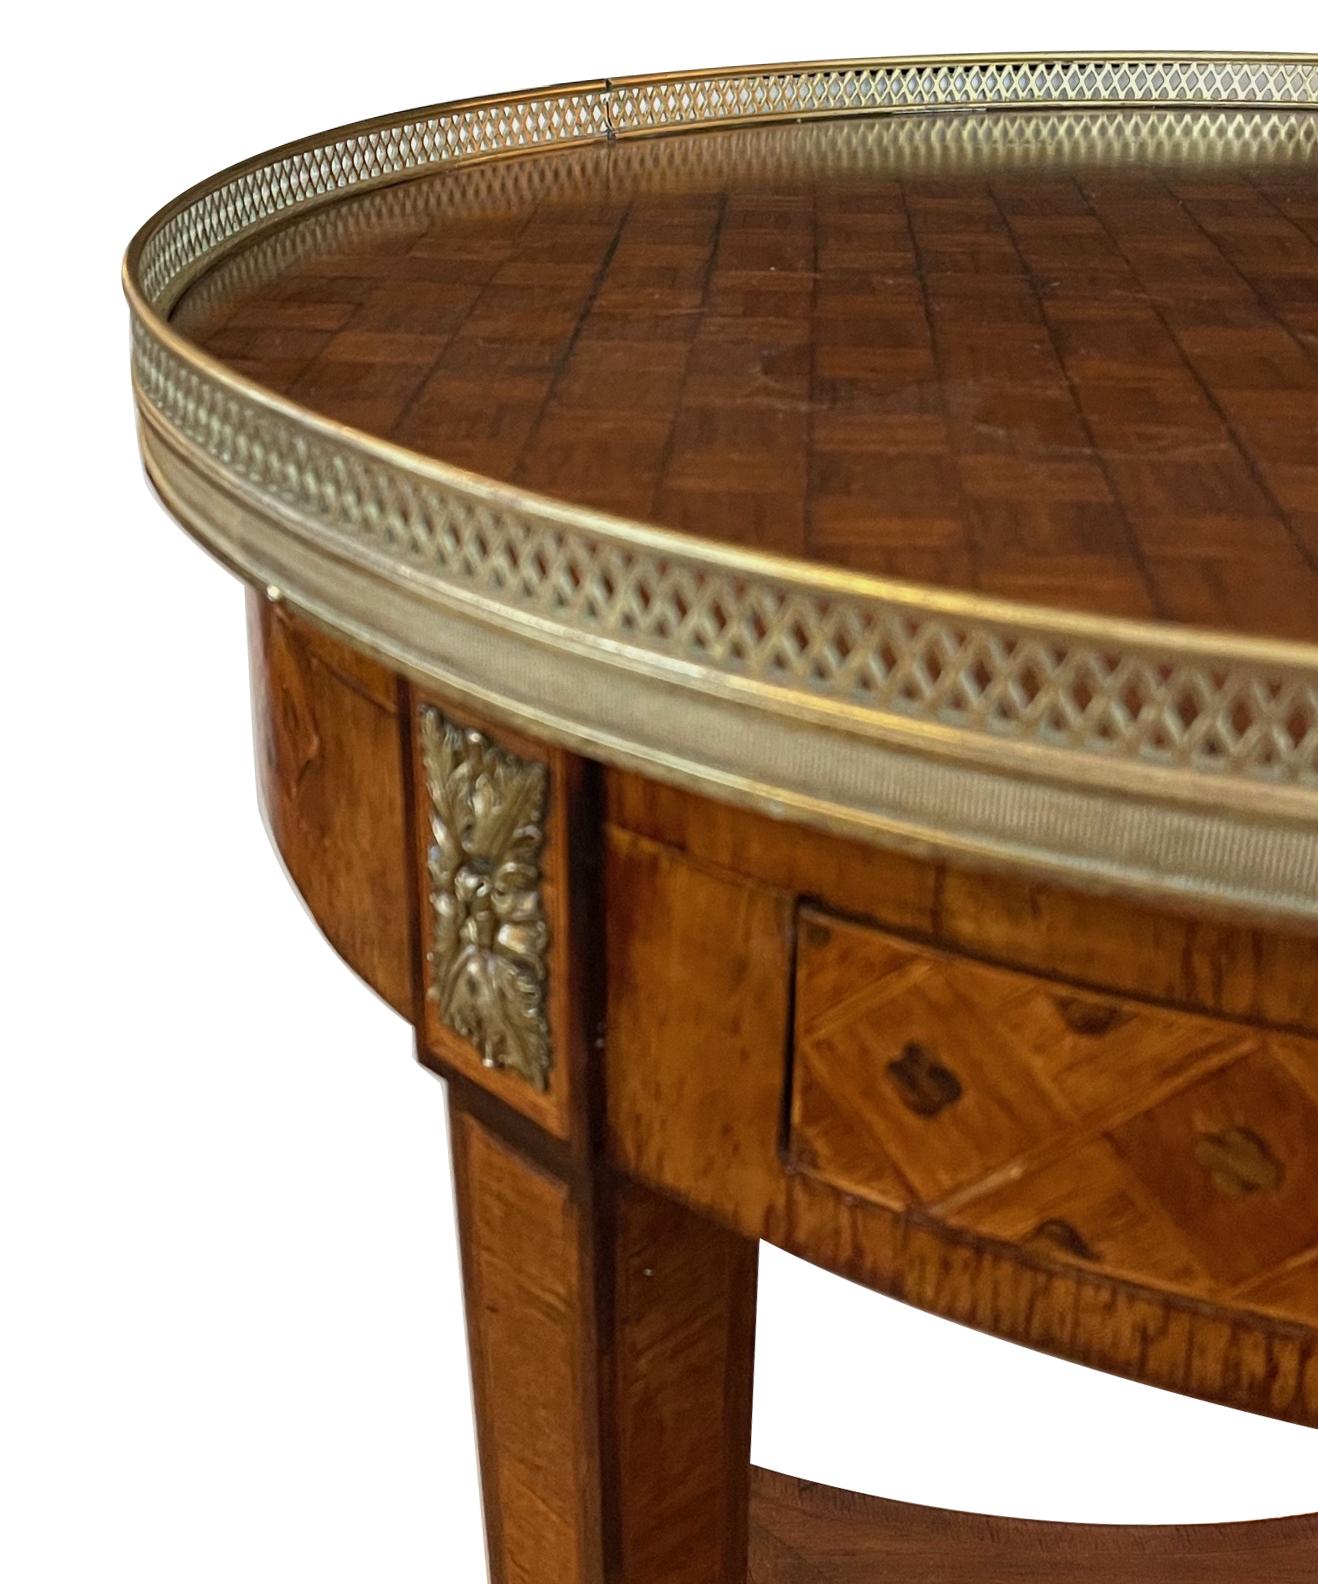 The circular top with brass pierced gallery over an apron fitted with two frieze drawers and candle slides; raised on tapering legs ending in bronze caps all joined by a lower concave shelf.